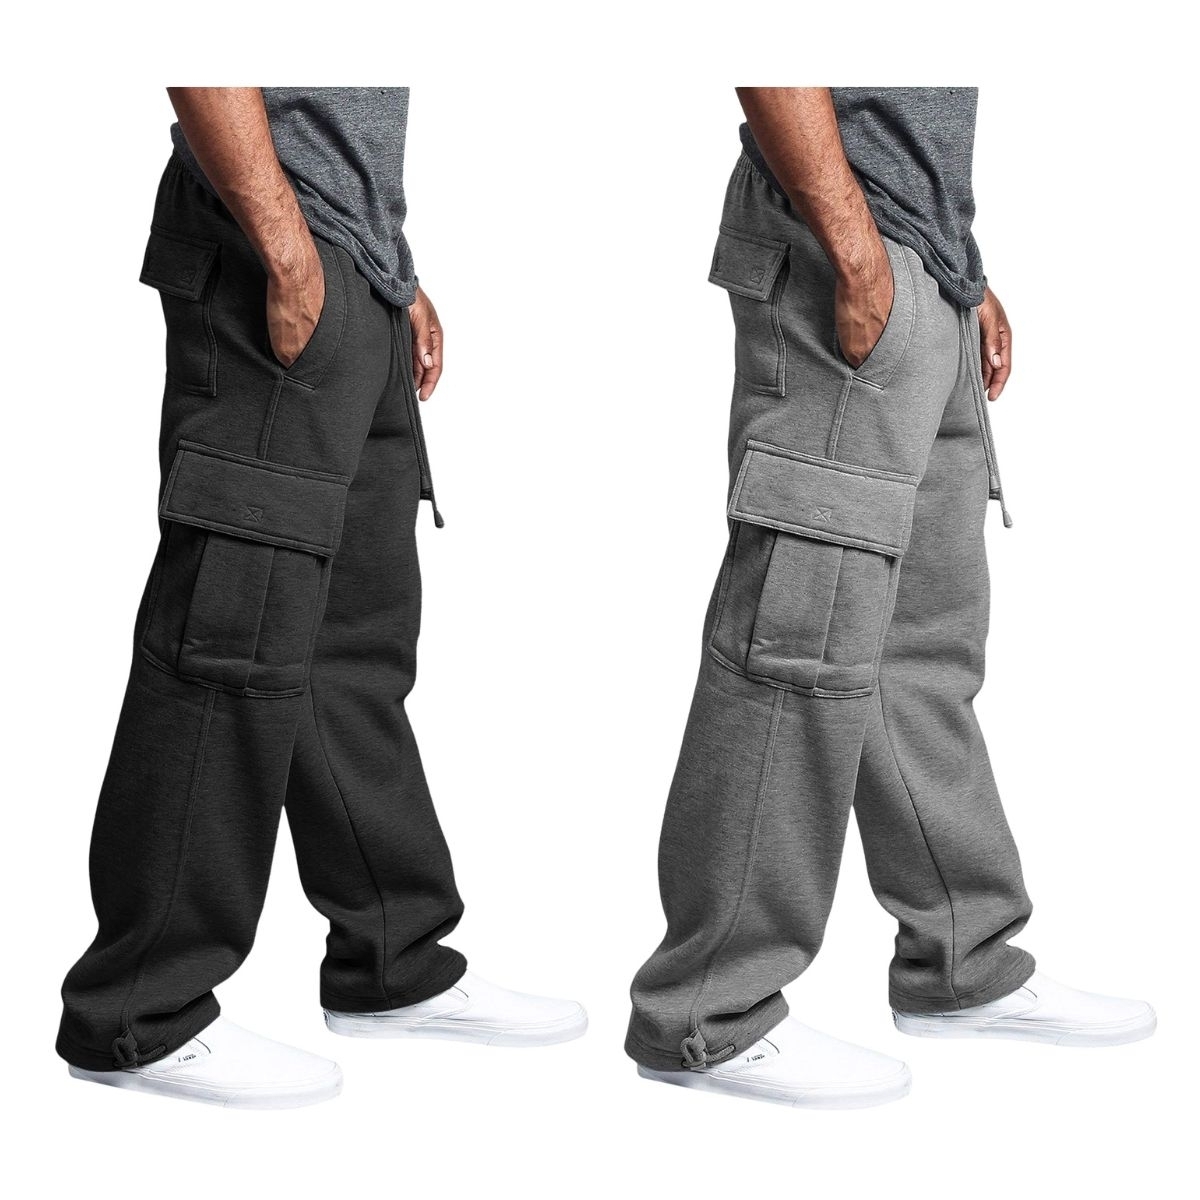 2-Pack: Men's Casual Solid Fleece Lined Cargo Jogger Soft Sweatpants With Pockets - Black&grey, X-large